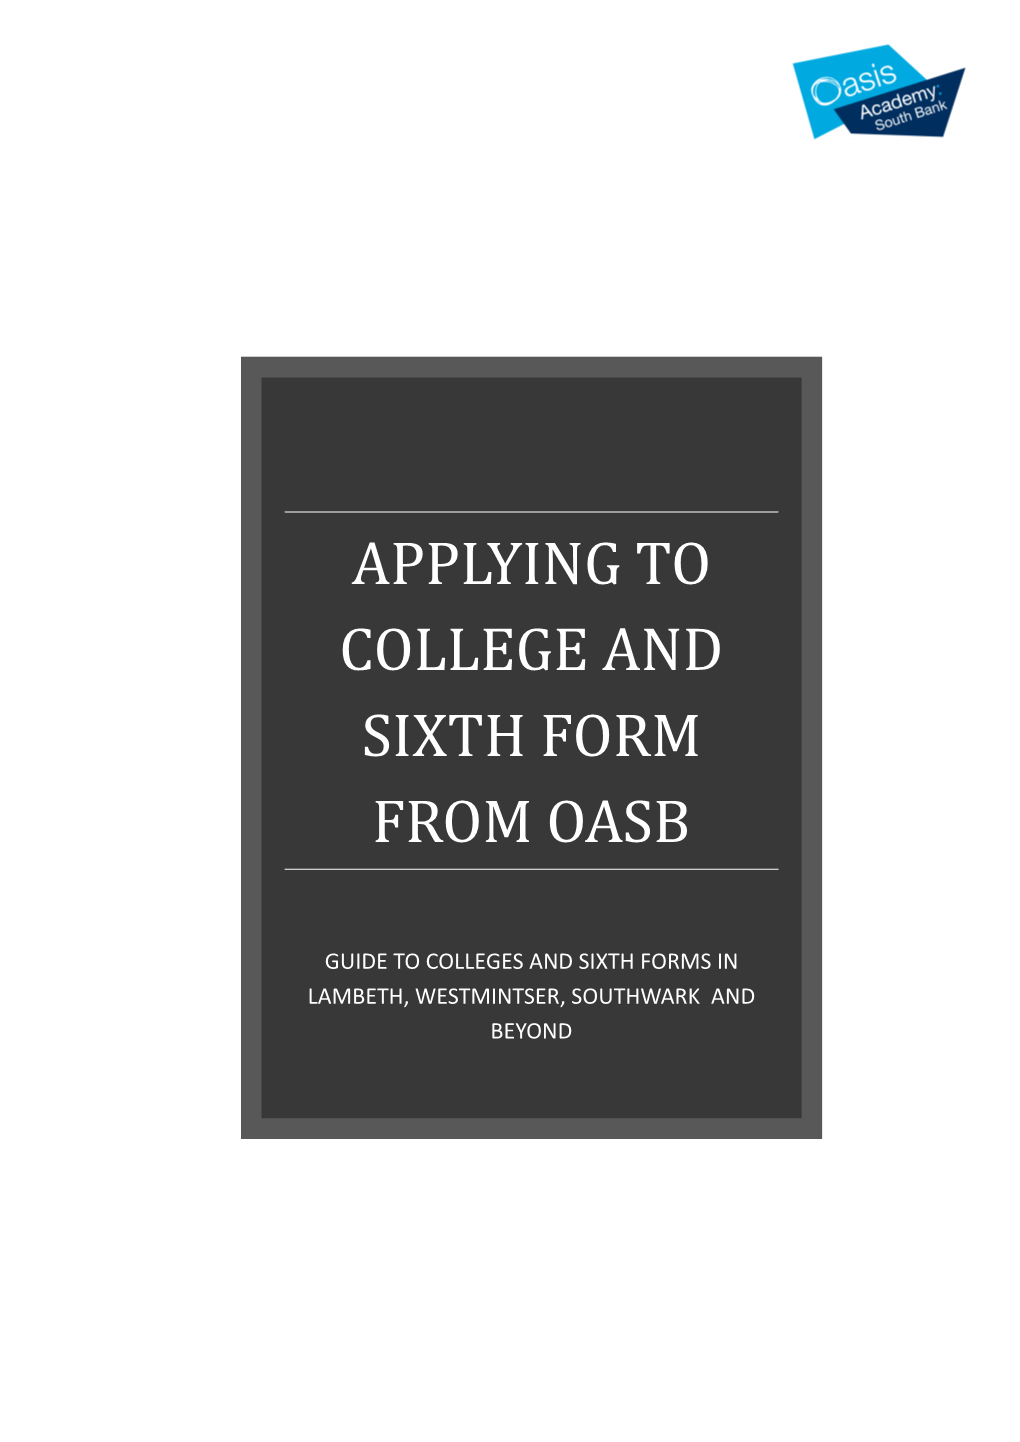 Applying to College and Sixth Form from Oasb